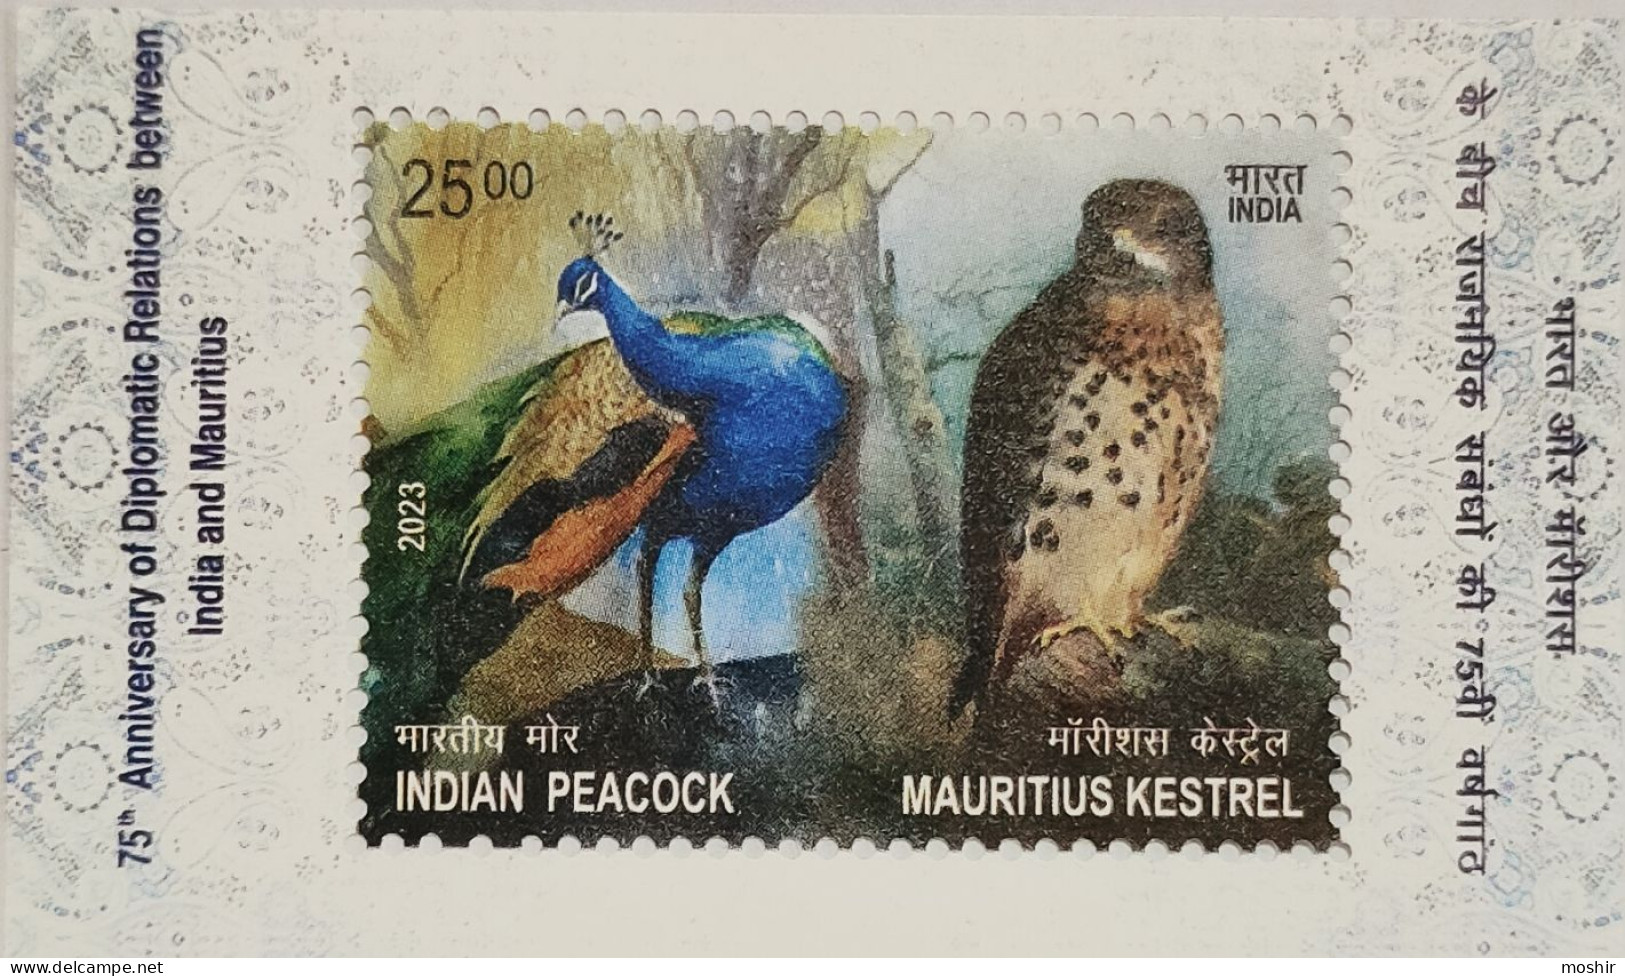 PEACOCK - KESTREL - INDIA-MAURITIUS JOINT ISSUE - Paons